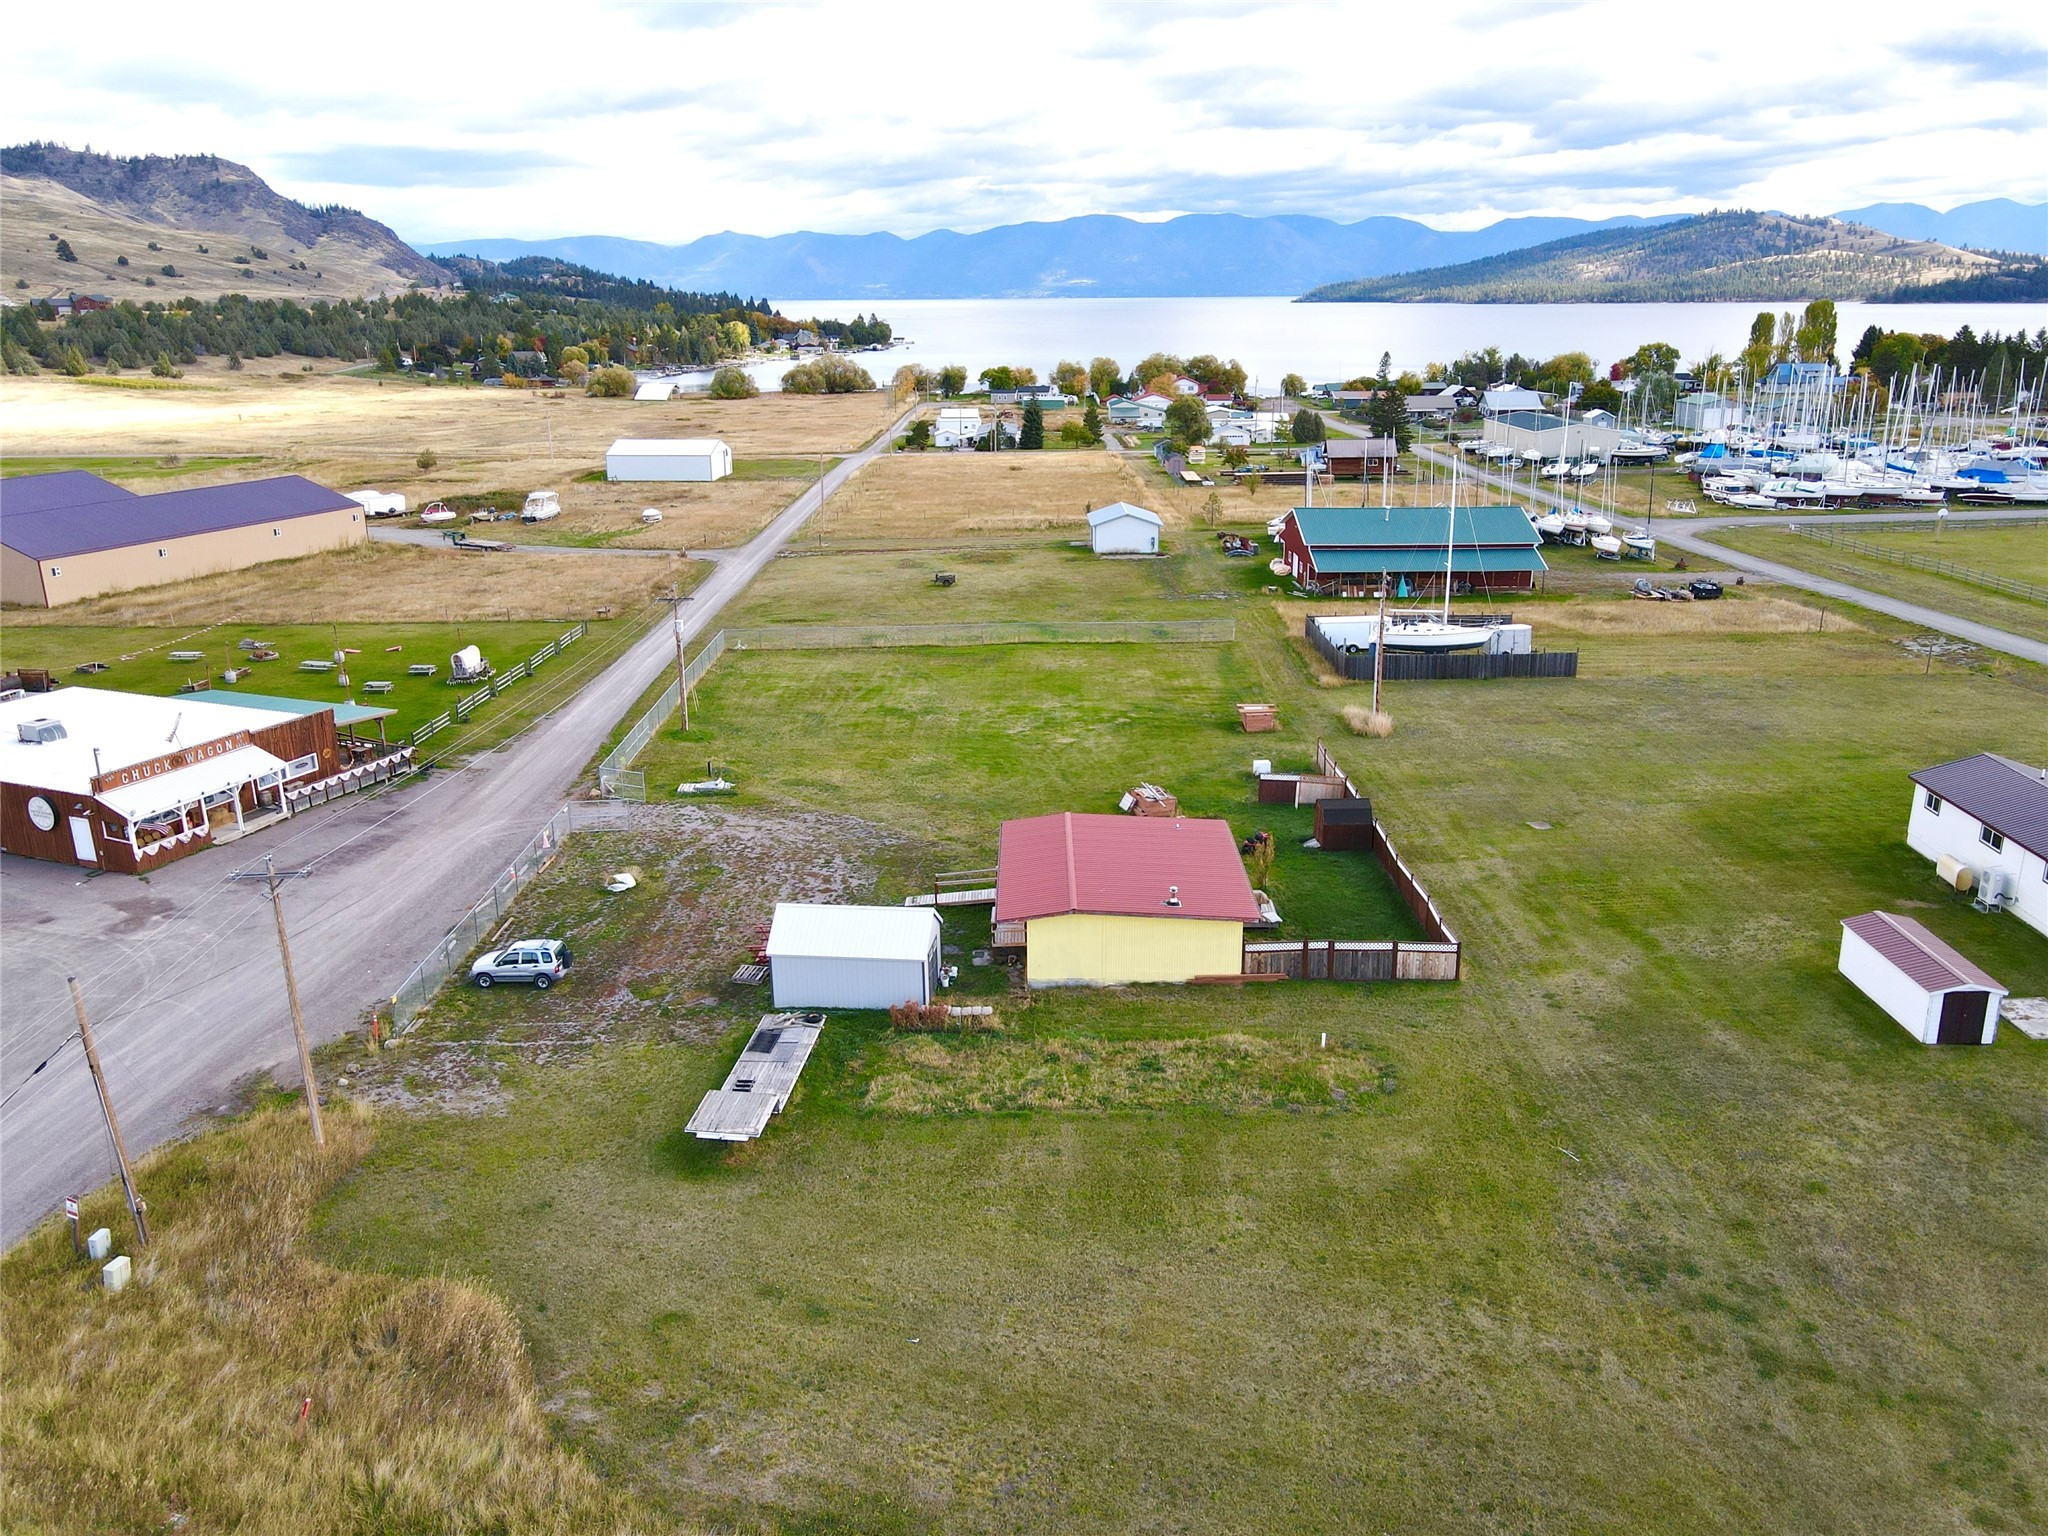 A GEM IN THE ROUGH.  Come make your lake life a reality in the heart of Dayton on the west shore of Flathead Lake! With just under 1 acre of land come build your forever or vacation home while living in the existing 716 sq ft dwelling.  With room to build, the possibilities for this property are endless -- build vacation rentals, a shop or a barndominimum.  No zoning or covenants so commercial opportunities may exist.  Within walking distance to the public boat launch and beach, enjoy your days on the water and your evenings taking in the breathtaking sunsets.  Dayton provides the perfect year-round “rural living” opportunity while still being in driving range to Kalispell, Whitefish, Lakeside, Polson and Missoula.  Hit the ski slopes at Blacktail Mountain in less than 45 minutes or take a trip up to Whitefish Mountain.  The property is being sold “as-is”.  

Call Amanda Adams at 406-360-8597 or your real estate professional for additional information to schedule a showing.